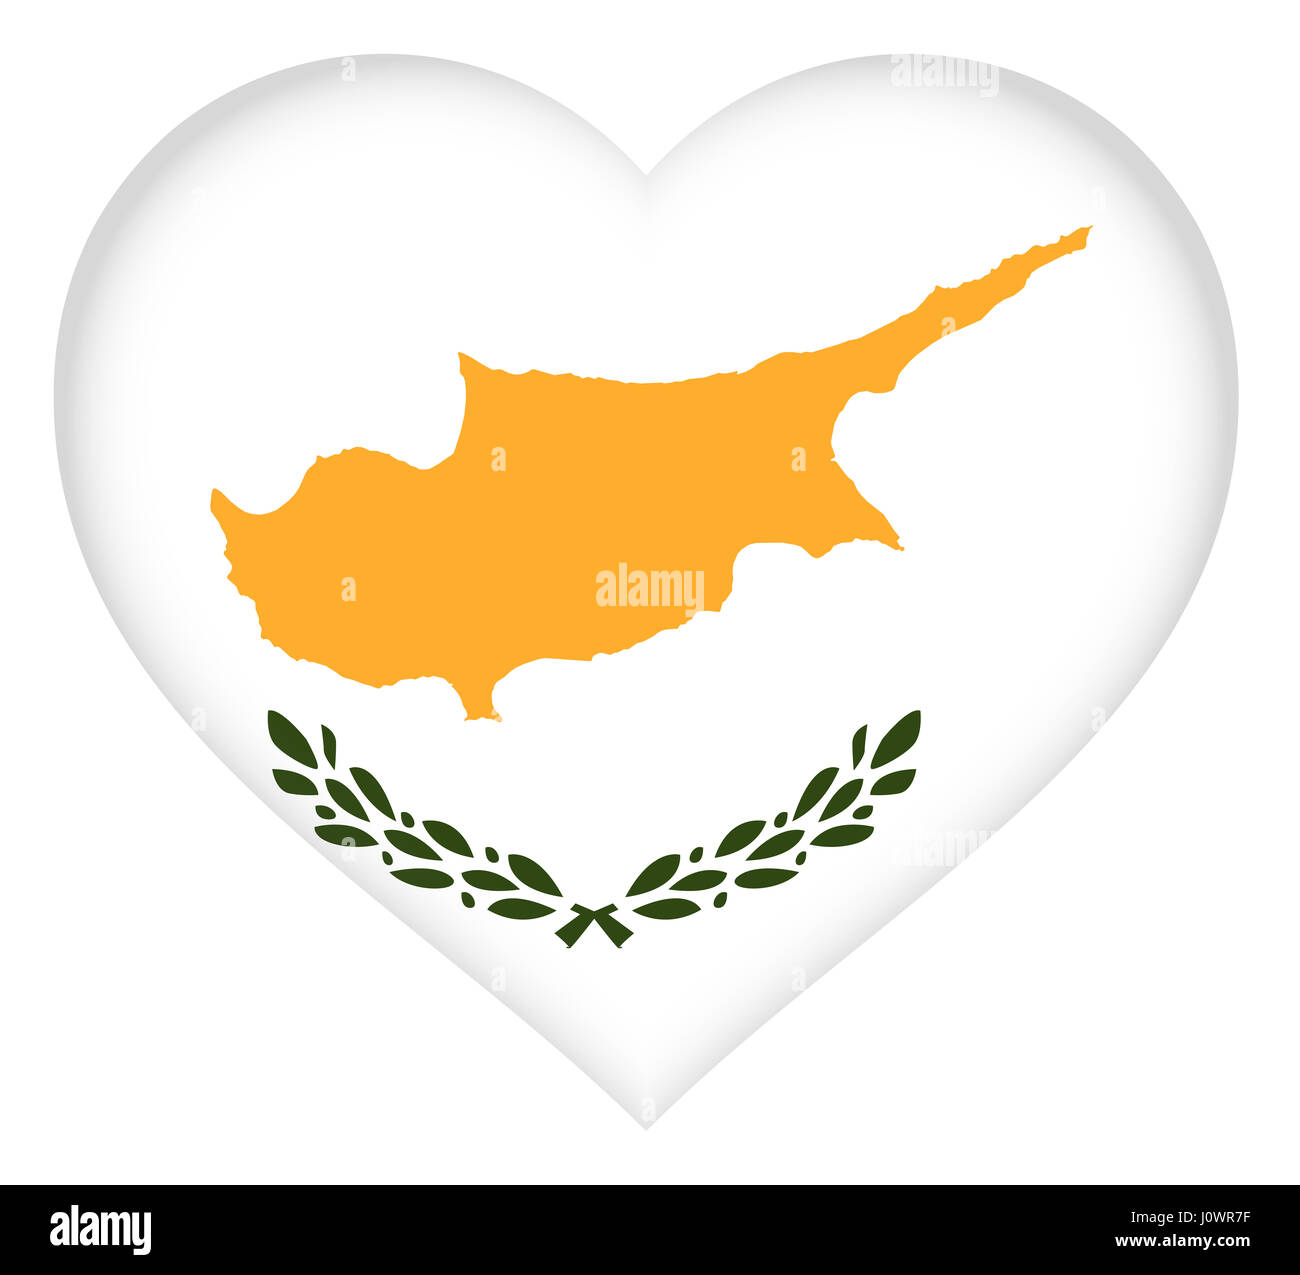 Illustration of the national flag of Cyprus shaped like a heart Stock Photo